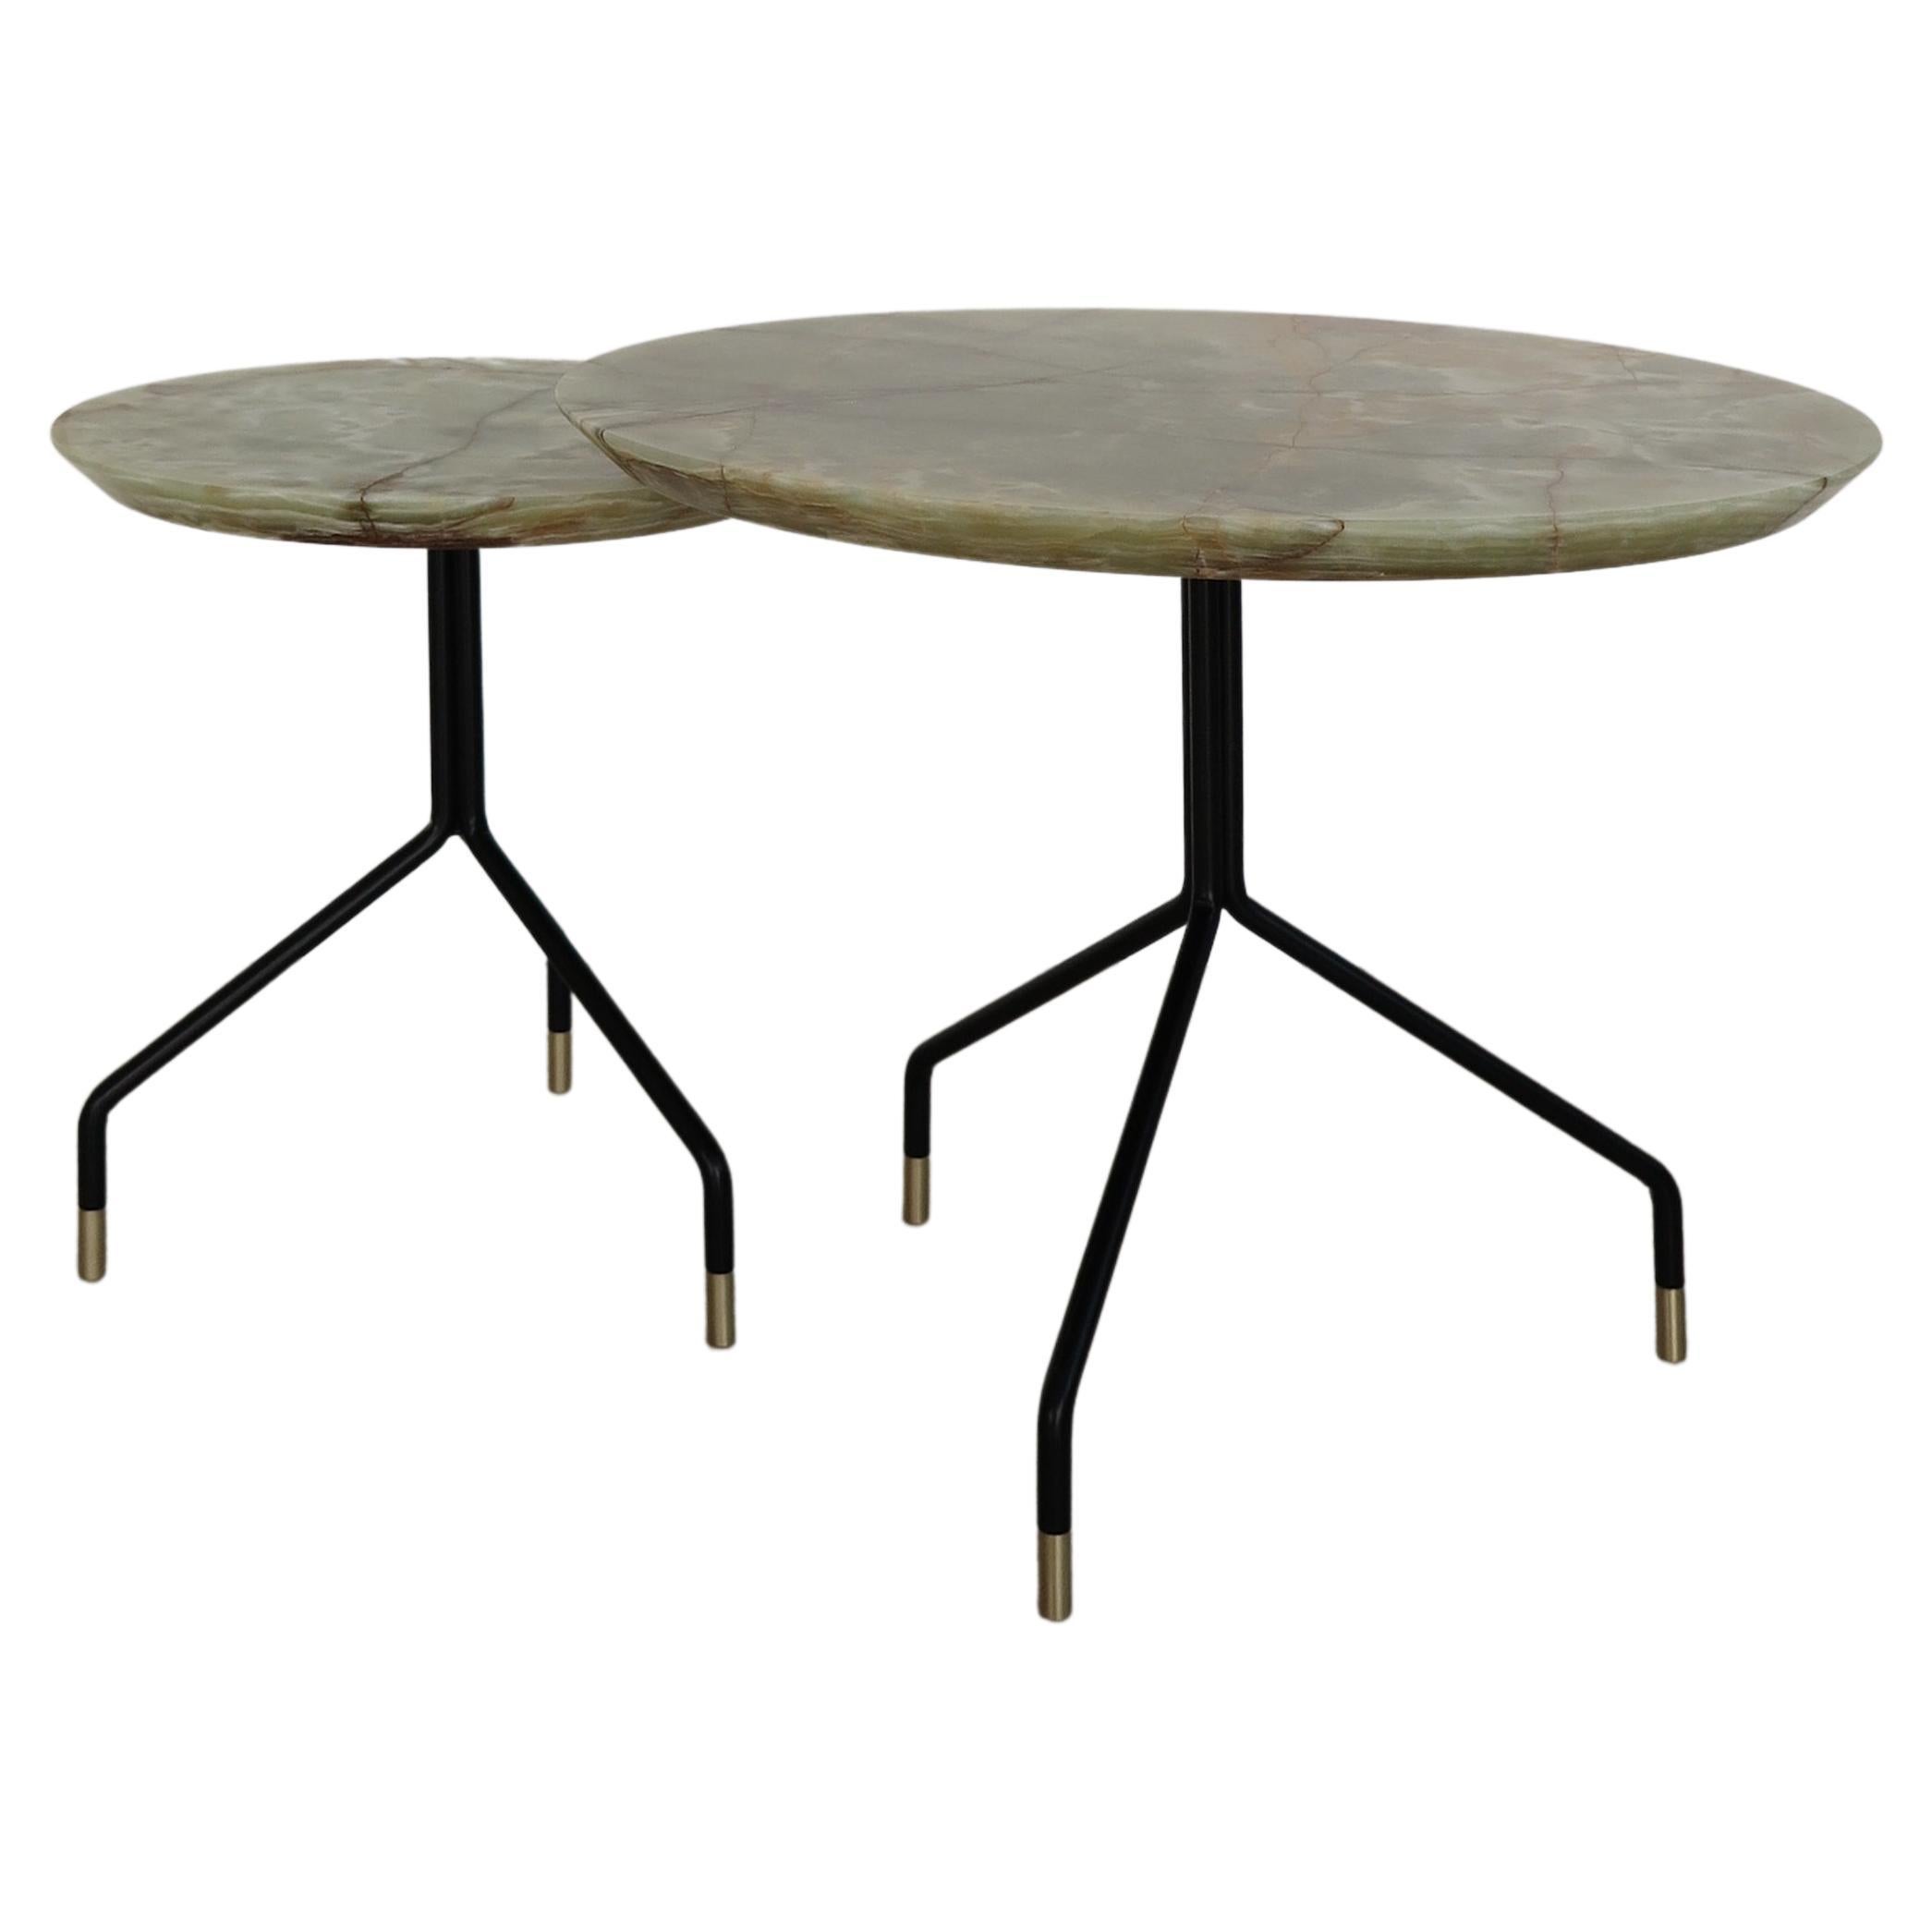 Italian Contemporary Onyx Marble Coffee Tables Set New Desig Capperidicasa For Sale